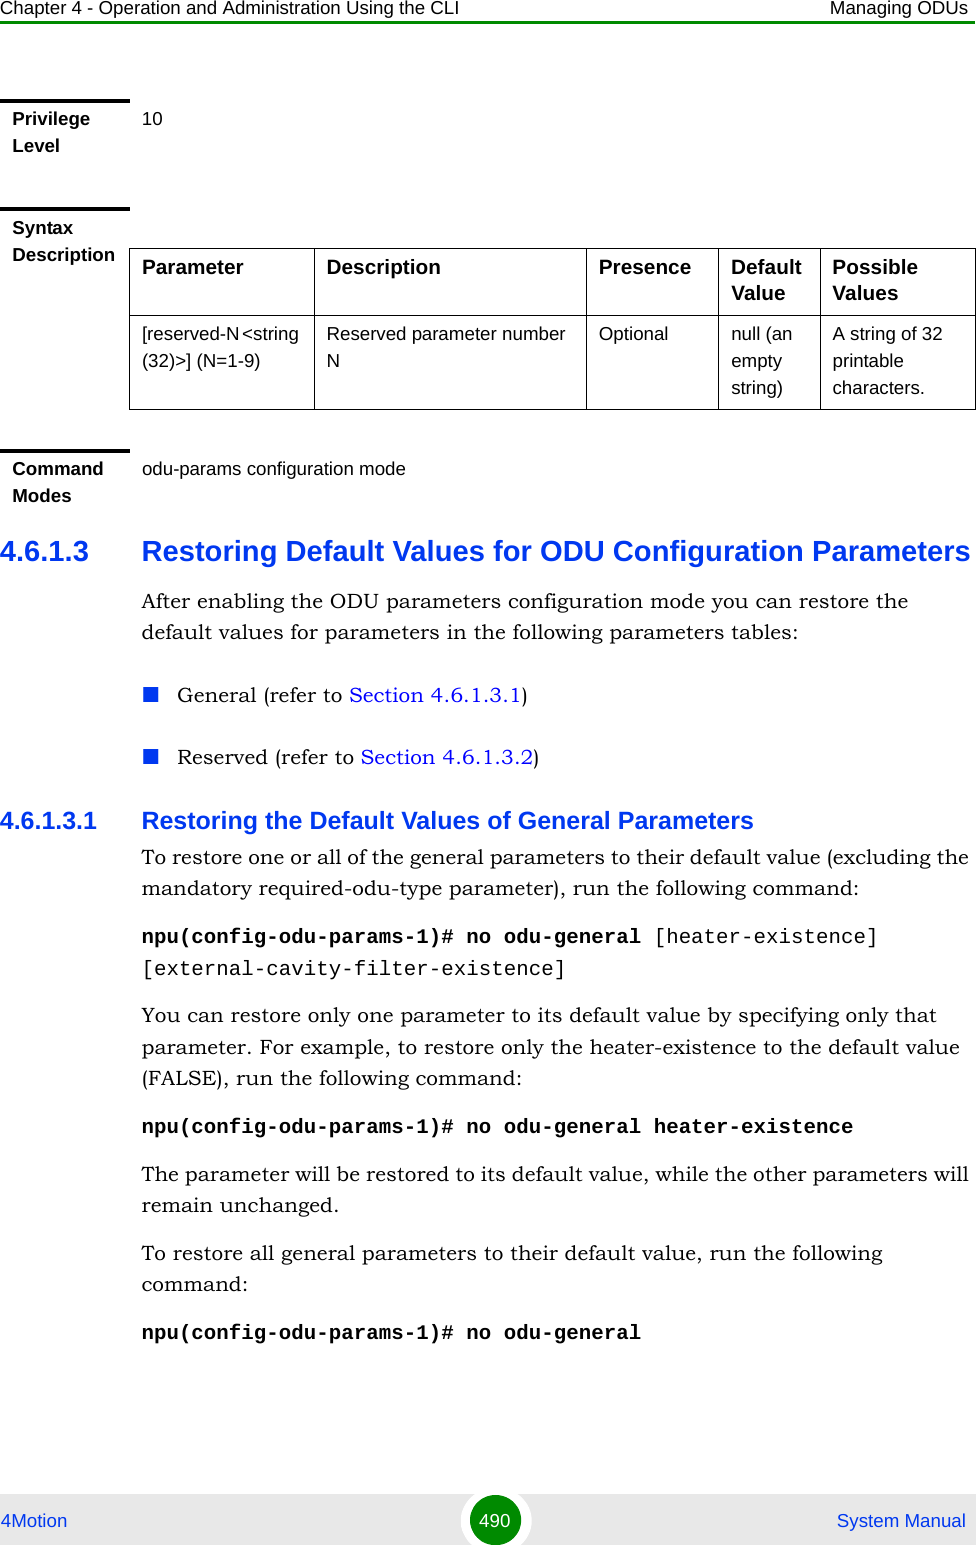 Chapter 4 - Operation and Administration Using the CLI Managing ODUs4Motion 490  System Manual4.6.1.3 Restoring Default Values for ODU Configuration ParametersAfter enabling the ODU parameters configuration mode you can restore the default values for parameters in the following parameters tables:General (refer to Section 4.6.1.3.1)Reserved (refer to Section 4.6.1.3.2)4.6.1.3.1 Restoring the Default Values of General ParametersTo restore one or all of the general parameters to their default value (excluding the mandatory required-odu-type parameter), run the following command:npu(config-odu-params-1)# no odu-general [heater-existence] [external-cavity-filter-existence]You can restore only one parameter to its default value by specifying only that parameter. For example, to restore only the heater-existence to the default value (FALSE), run the following command:npu(config-odu-params-1)# no odu-general heater-existenceThe parameter will be restored to its default value, while the other parameters will remain unchanged.To restore all general parameters to their default value, run the following command:npu(config-odu-params-1)# no odu-generalPrivilege Level10Syntax Description Parameter Description Presence Default Value Possible Values[reserved-N &lt;string (32)&gt;] (N=1-9)Reserved parameter number NOptional null (an empty string)A string of 32 printable characters.Command Modesodu-params configuration mode